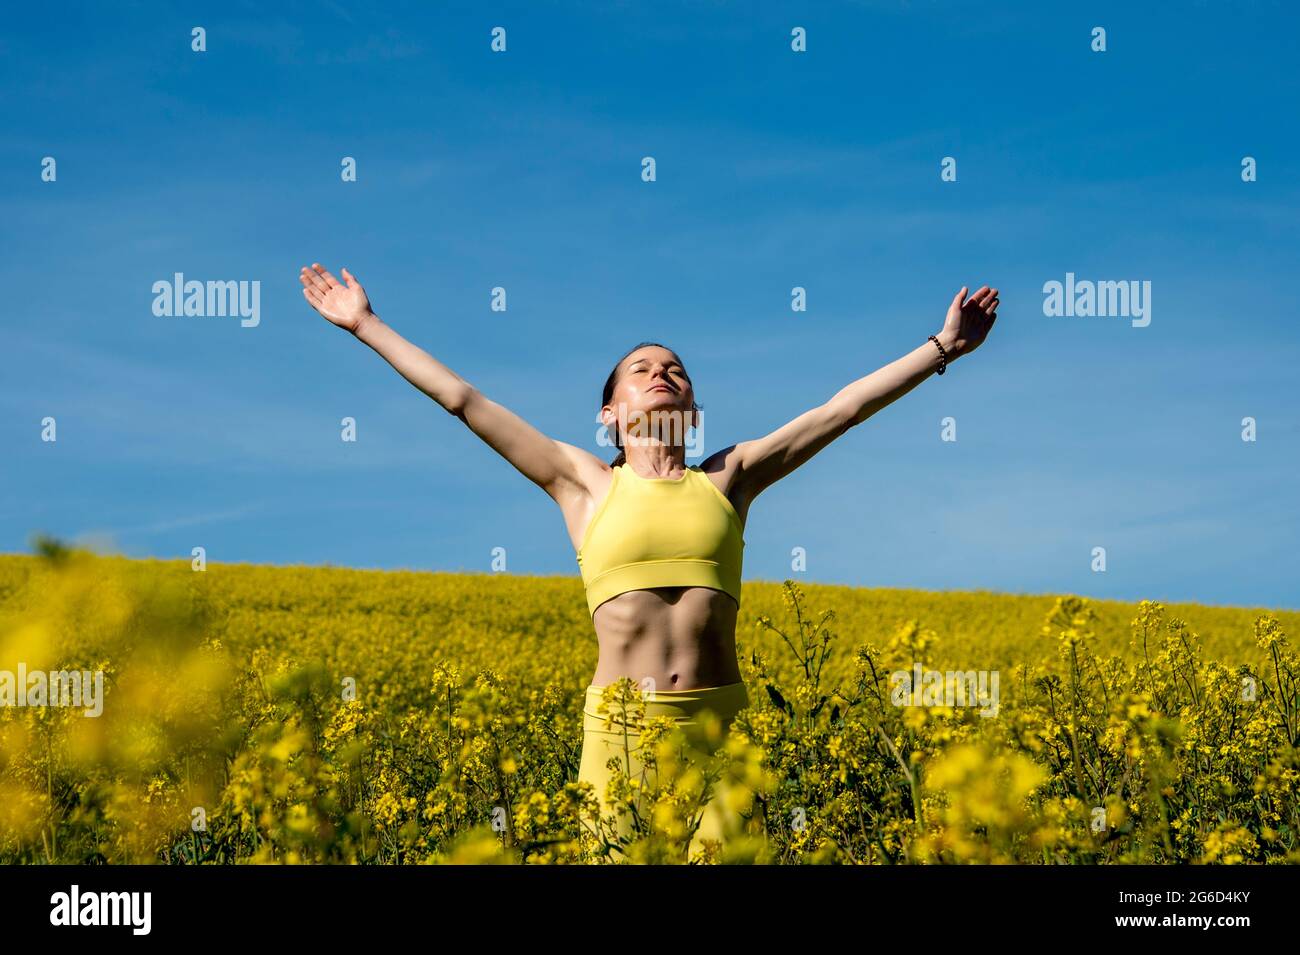 fit sporty woman wearing yellow activewear standing in a yellow fied with her arms raised enjoying the sun Stock Photo